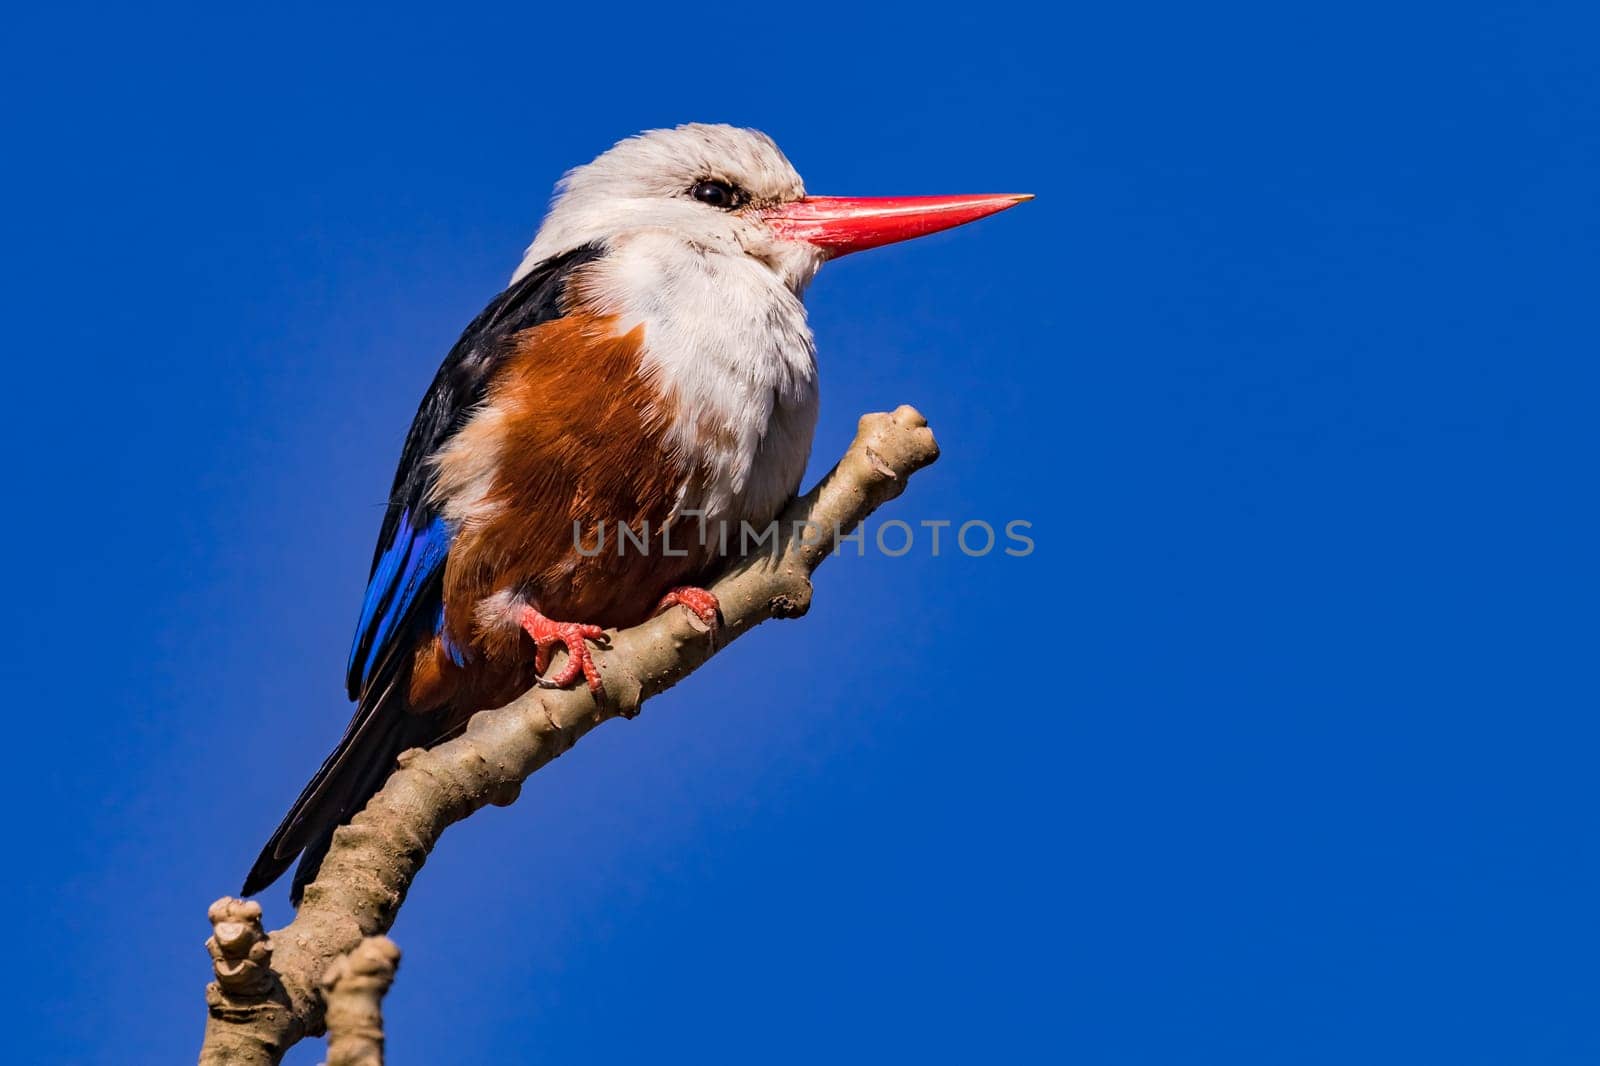 A colorful kingfisher of the species gray-headed kingfisher sits wild on a branch on the island of Santiago, Cape Verde Islands